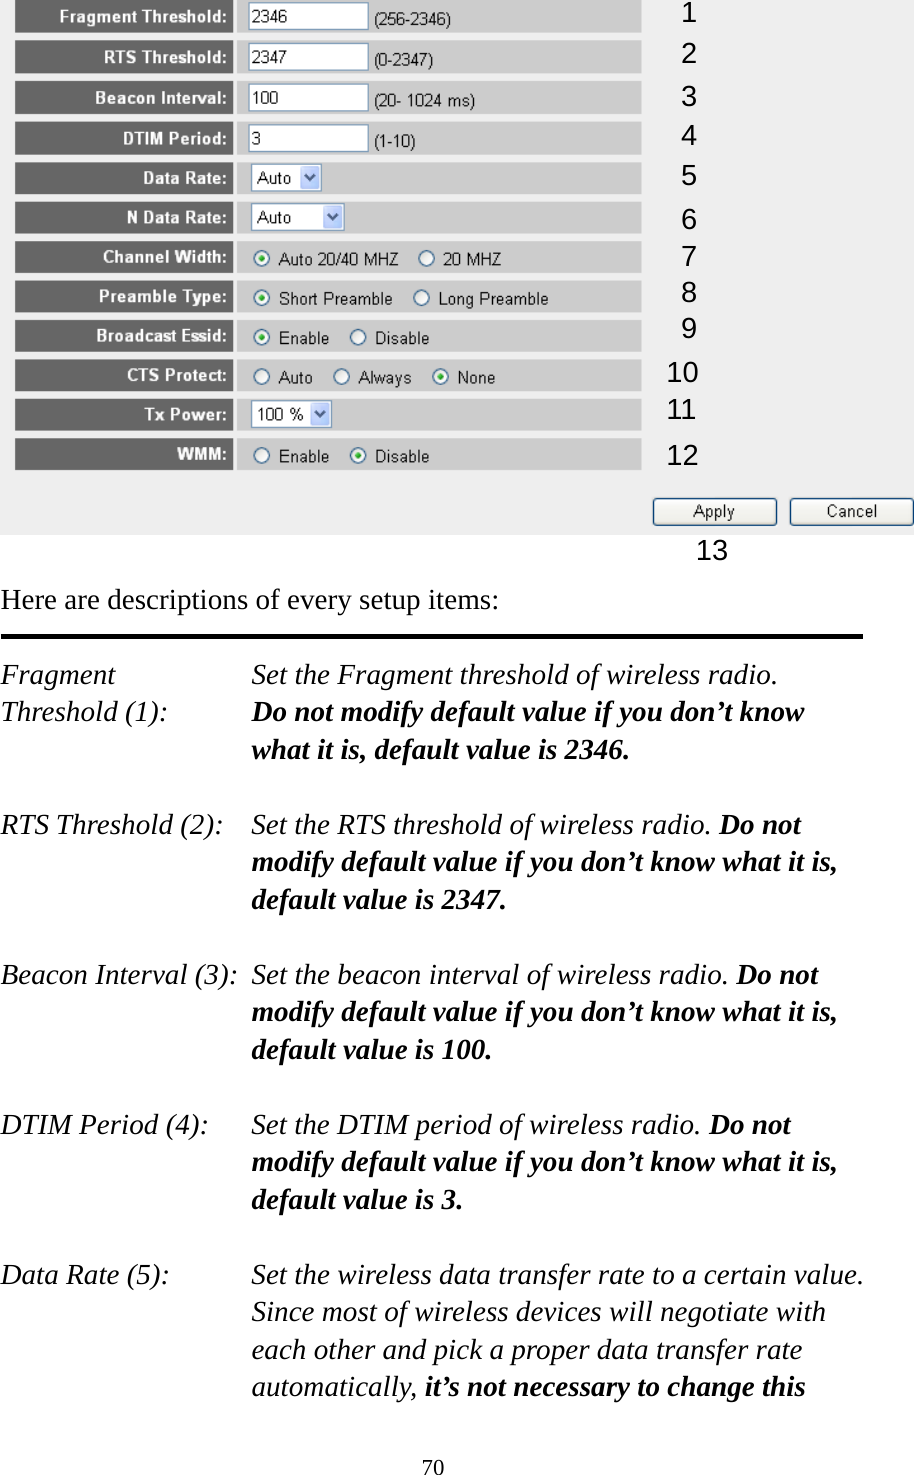 70   Here are descriptions of every setup items:  Fragment  Set the Fragment threshold of wireless radio.    Threshold (1):  Do not modify default value if you don’t know what it is, default value is 2346.  RTS Threshold (2):    Set the RTS threshold of wireless radio. Do not modify default value if you don’t know what it is, default value is 2347.  Beacon Interval (3):  Set the beacon interval of wireless radio. Do not modify default value if you don’t know what it is, default value is 100.  DTIM Period (4):    Set the DTIM period of wireless radio. Do not modify default value if you don’t know what it is, default value is 3.  Data Rate (5):    Set the wireless data transfer rate to a certain value. Since most of wireless devices will negotiate with each other and pick a proper data transfer rate automatically, it’s not necessary to change this 1 2 3 4 5 7 8 6 9 10 11 12 13 